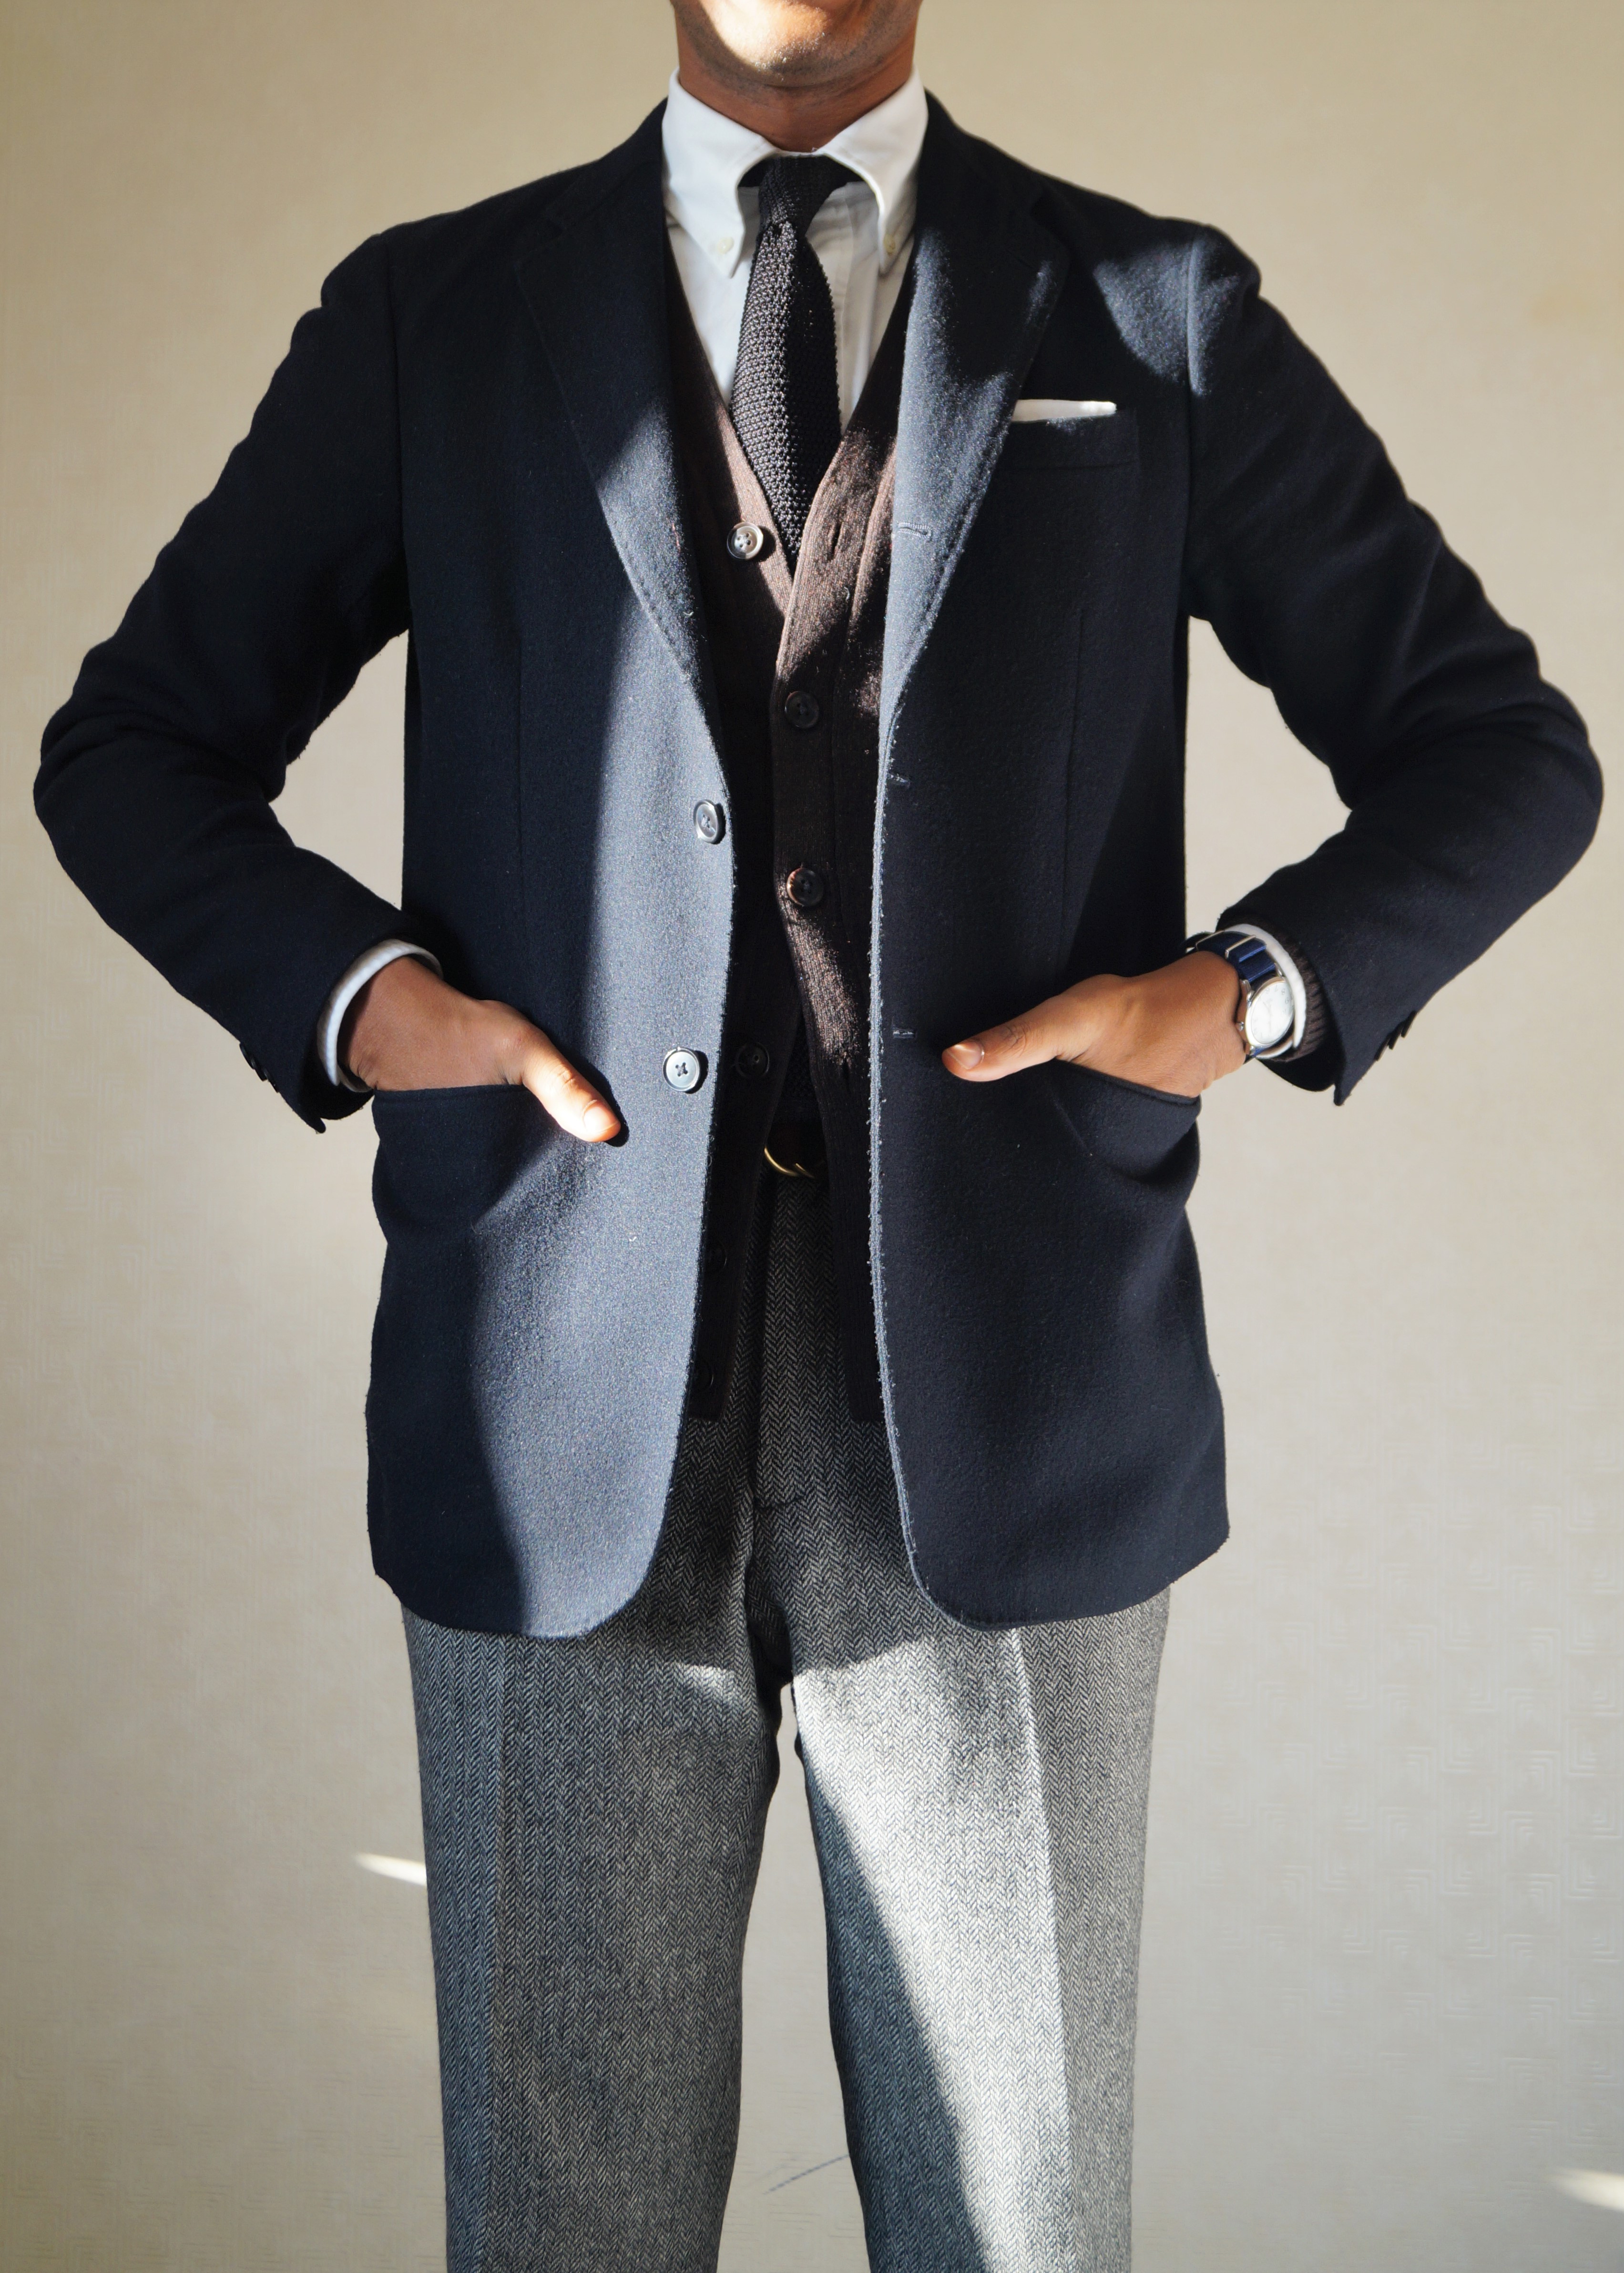 Disagreeable Menswear Post Of The Day | Page 346 | DressedWell